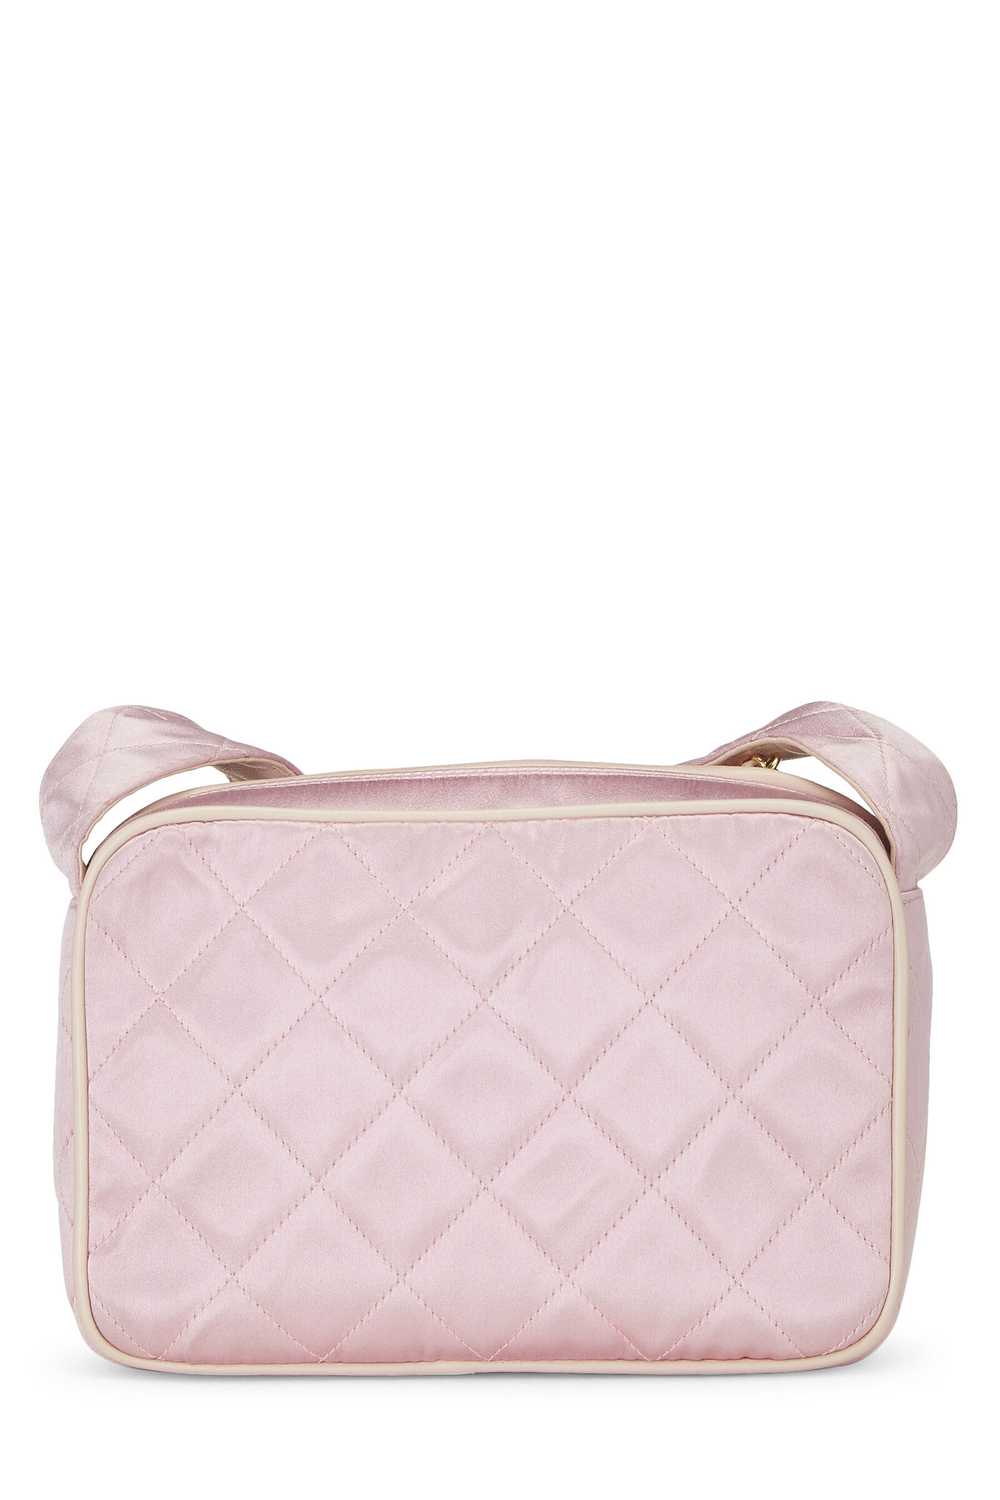 Pink Quilted Satin 'CC' Shoulder Bag Small - image 6